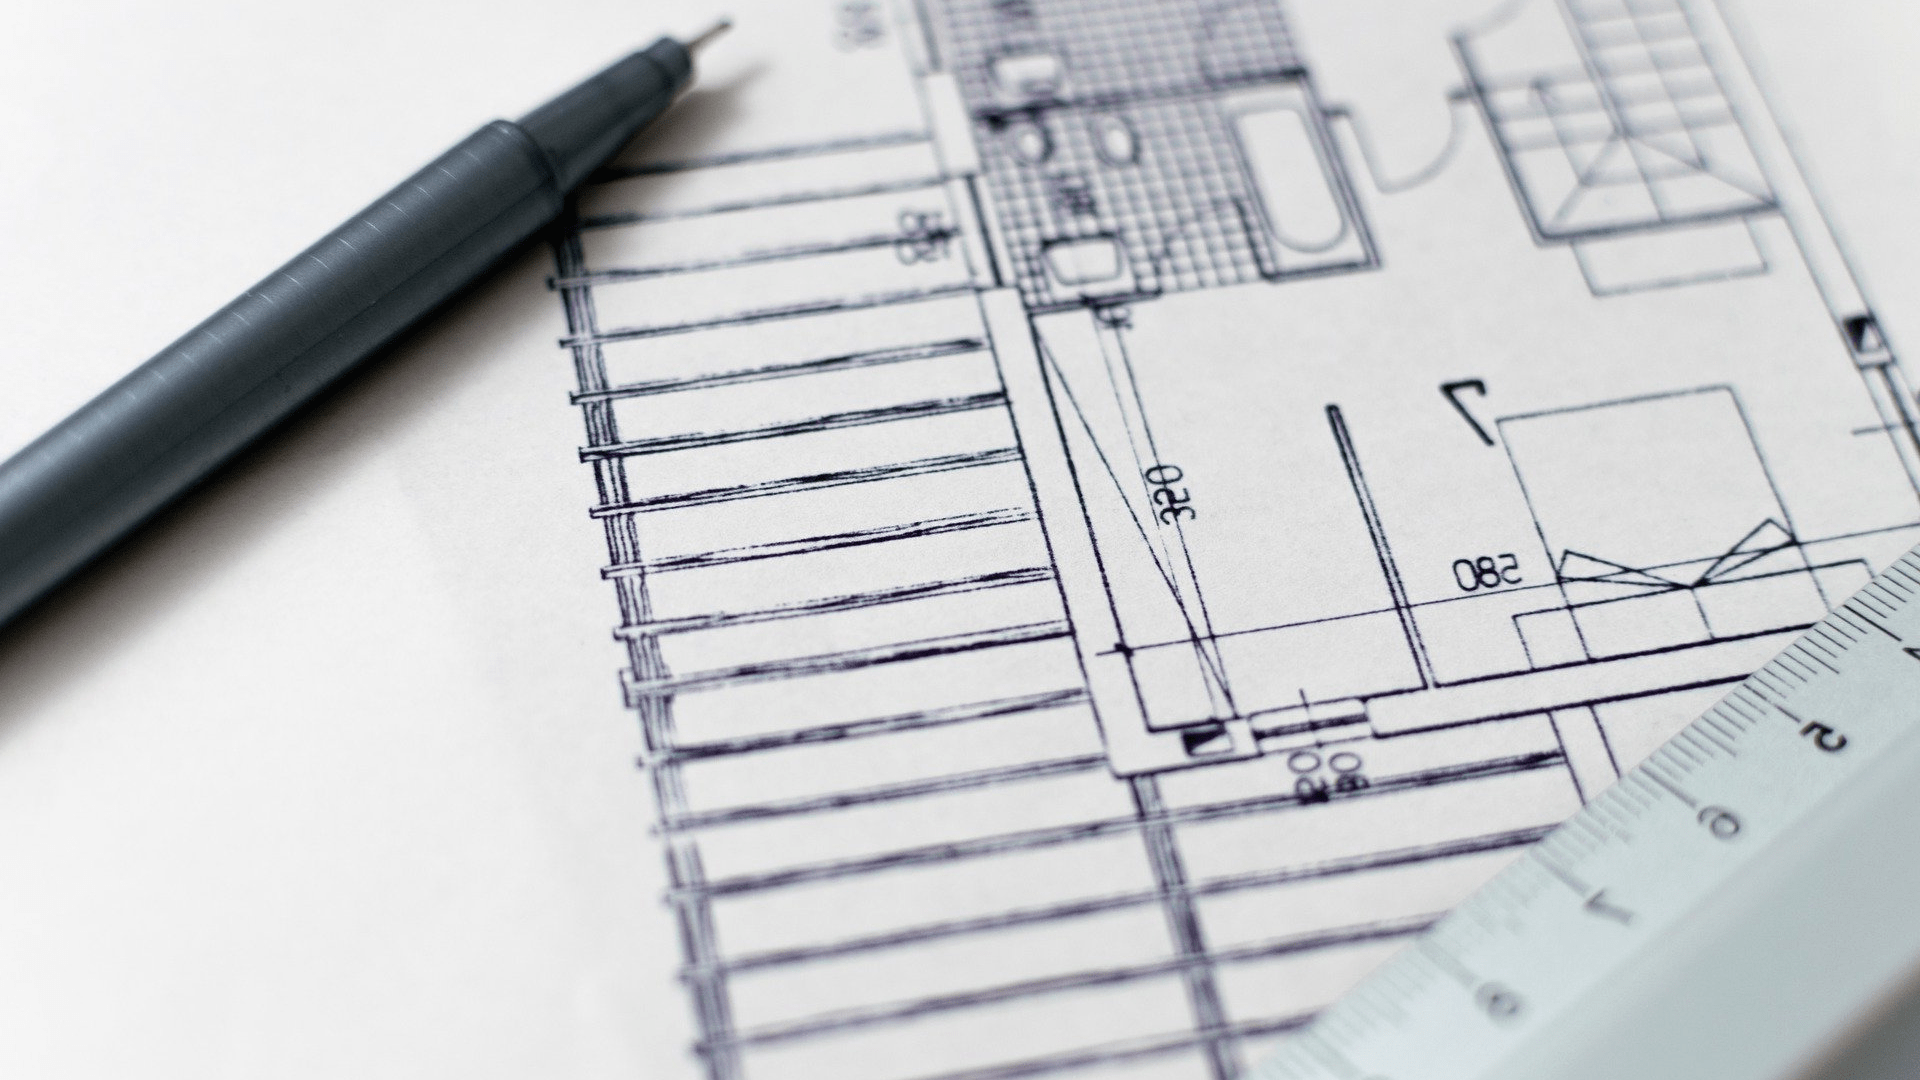 Close up of a floor plan drawing on a bit of paper